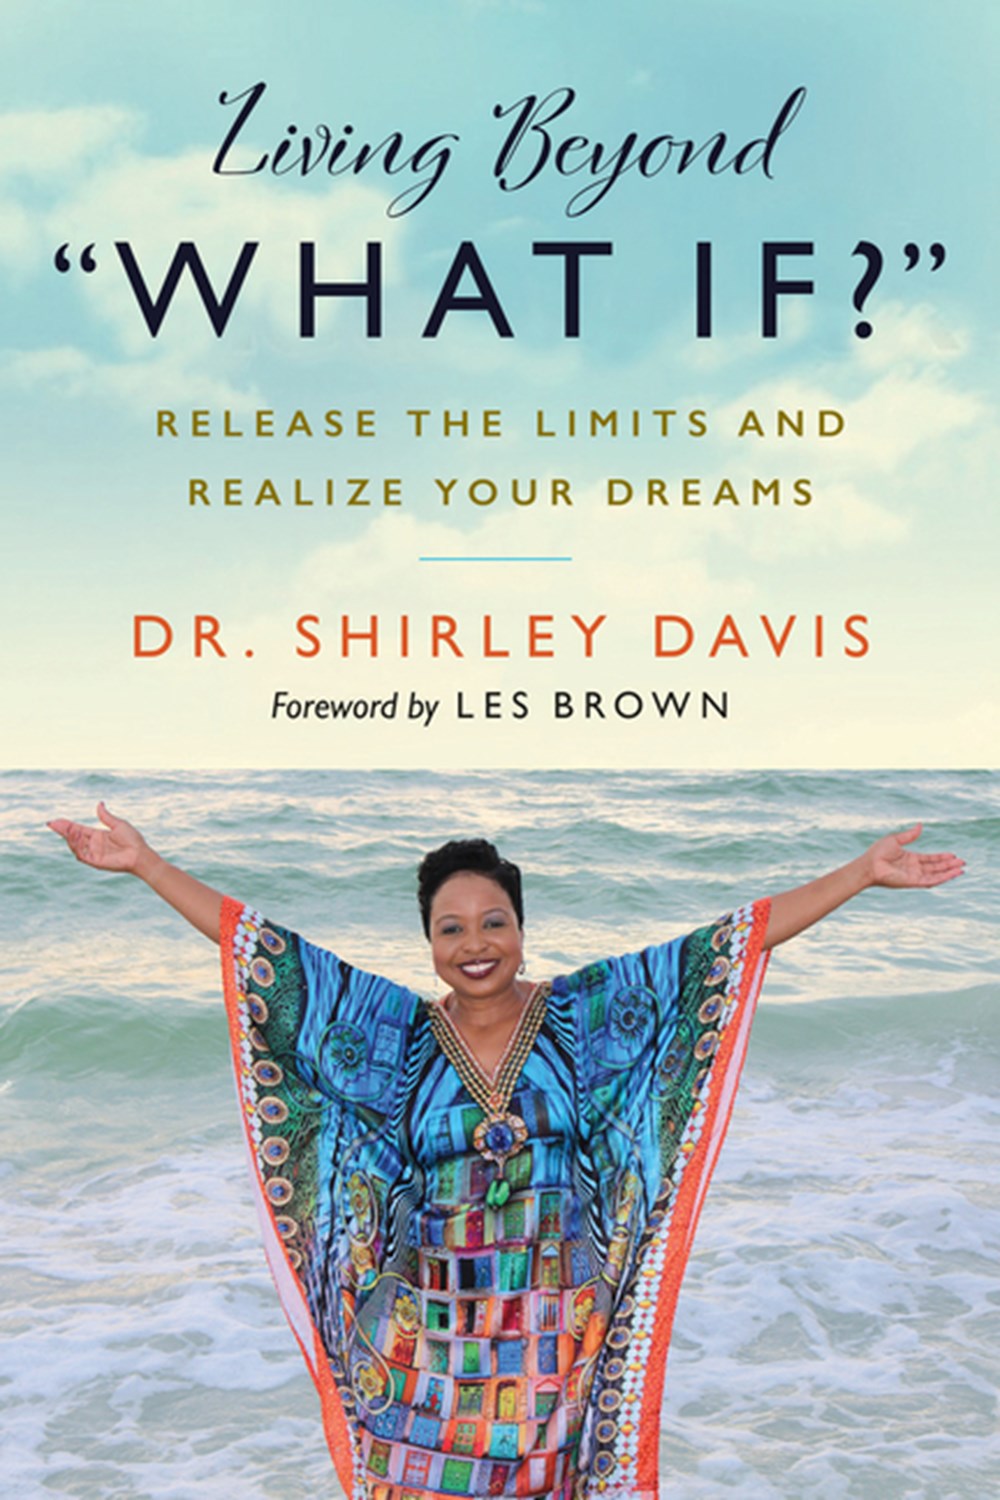 Living Beyond "What If?" Release the Limits and Realize Your Dreams